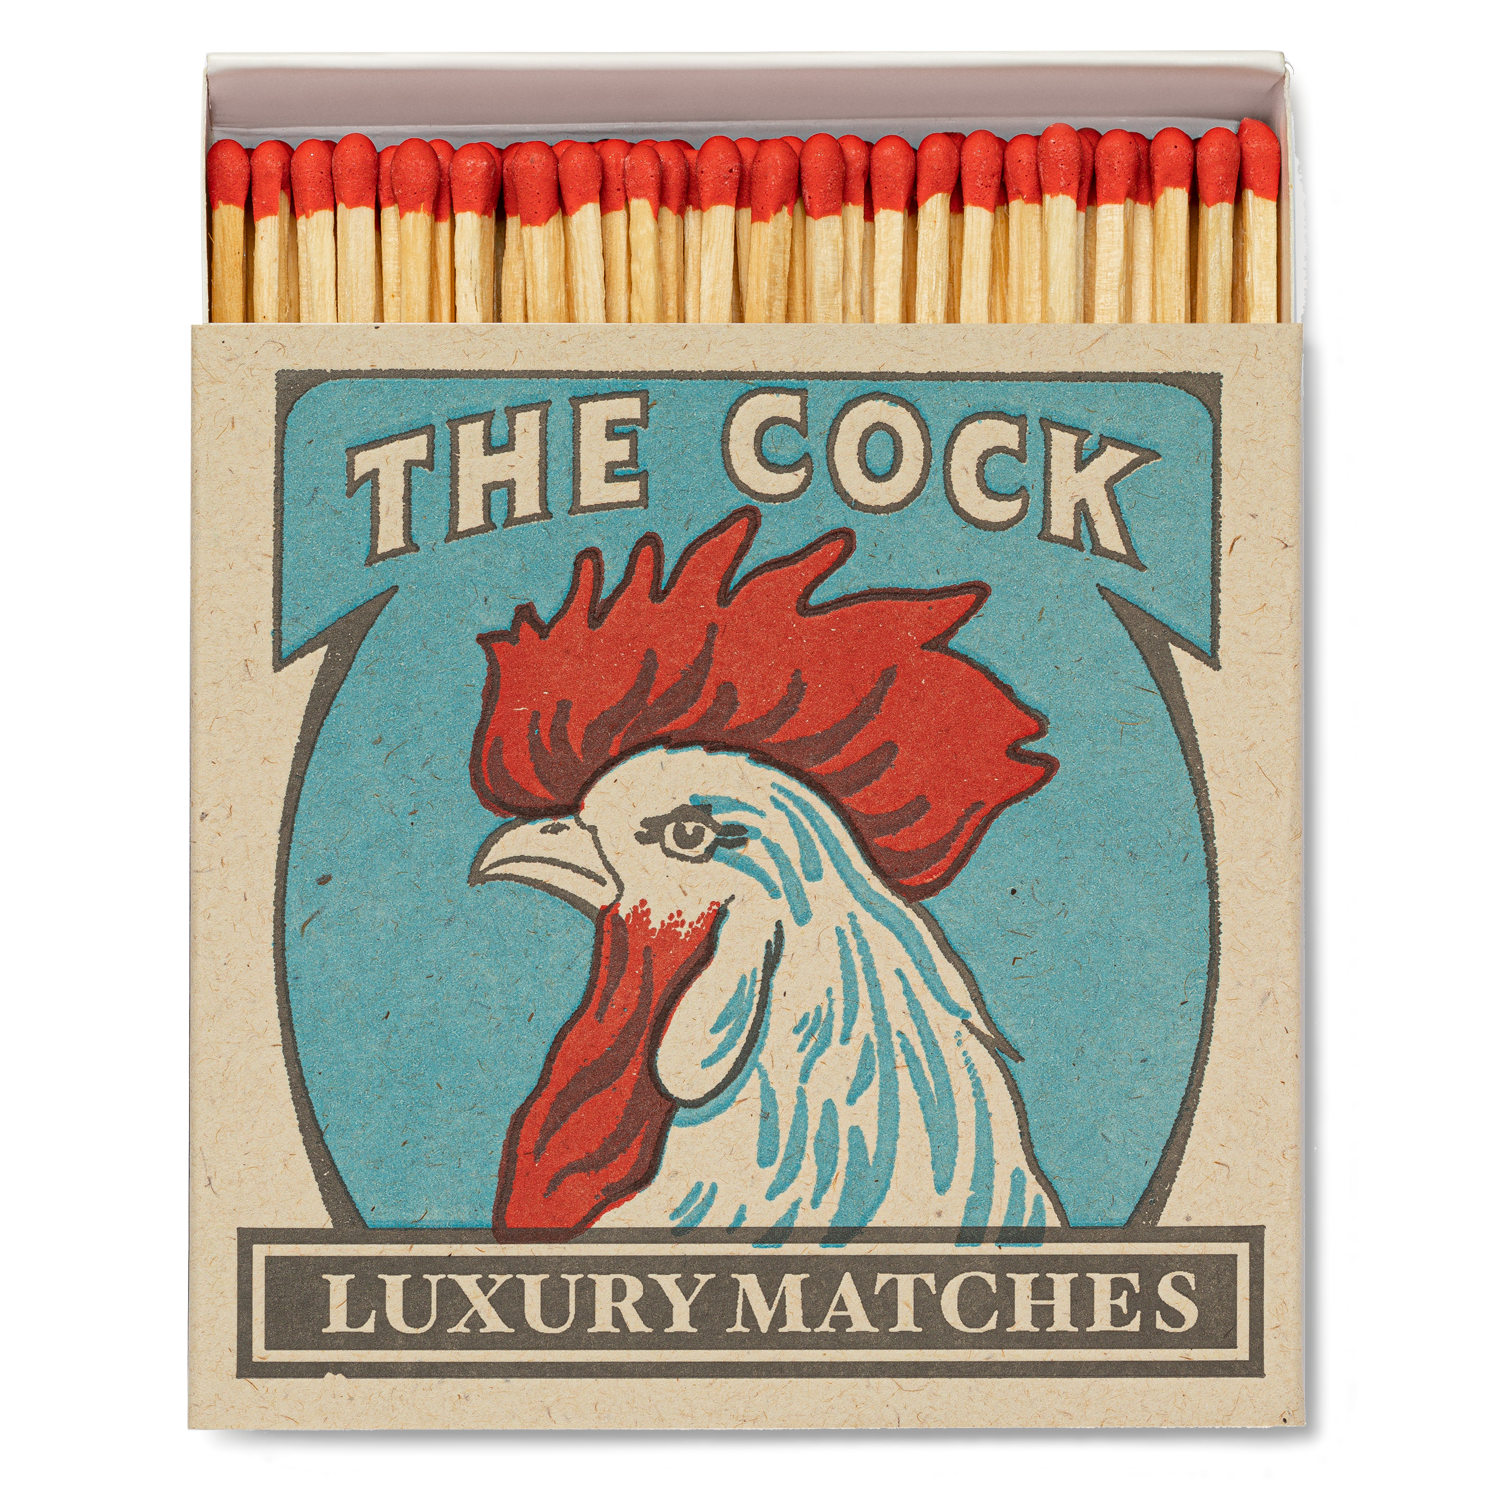 Archivist Luxury Matches - The Cock